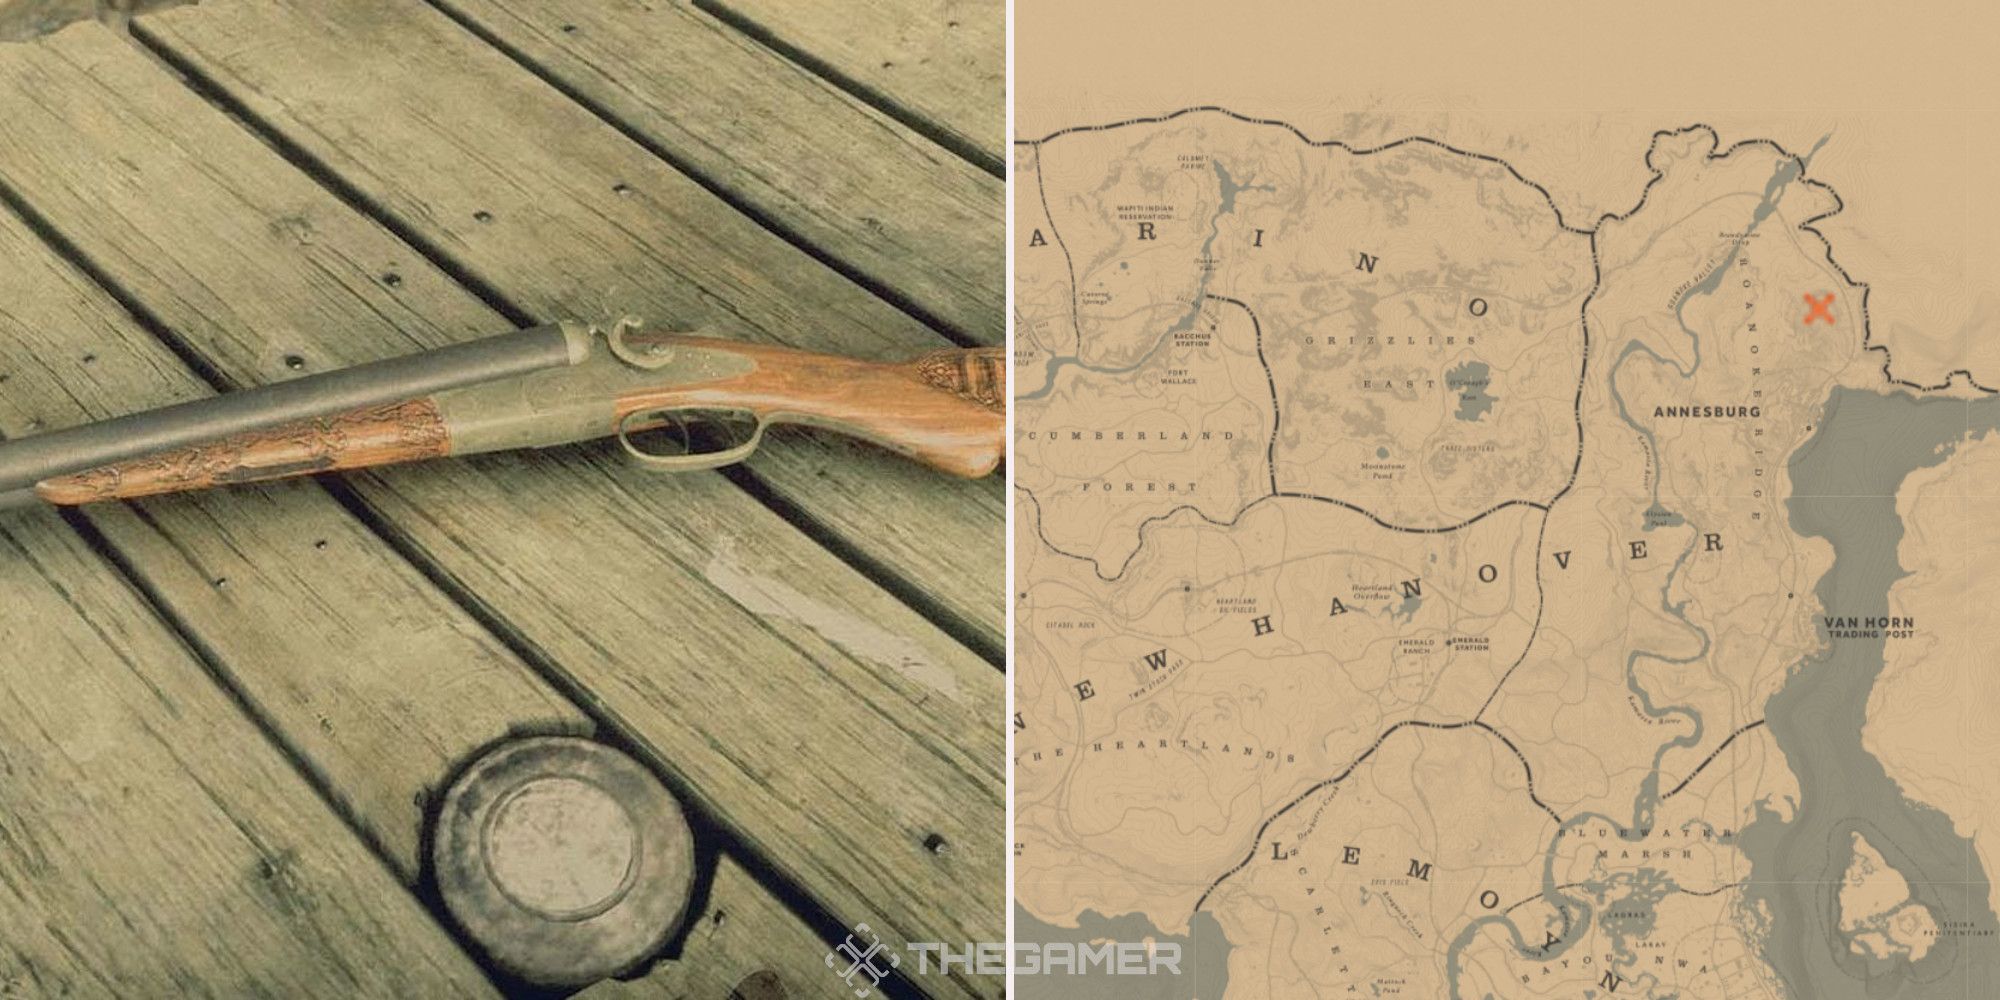  The rare shotgun in Red Dead Redemption 2, next to an image of where it can be found marked on the map.